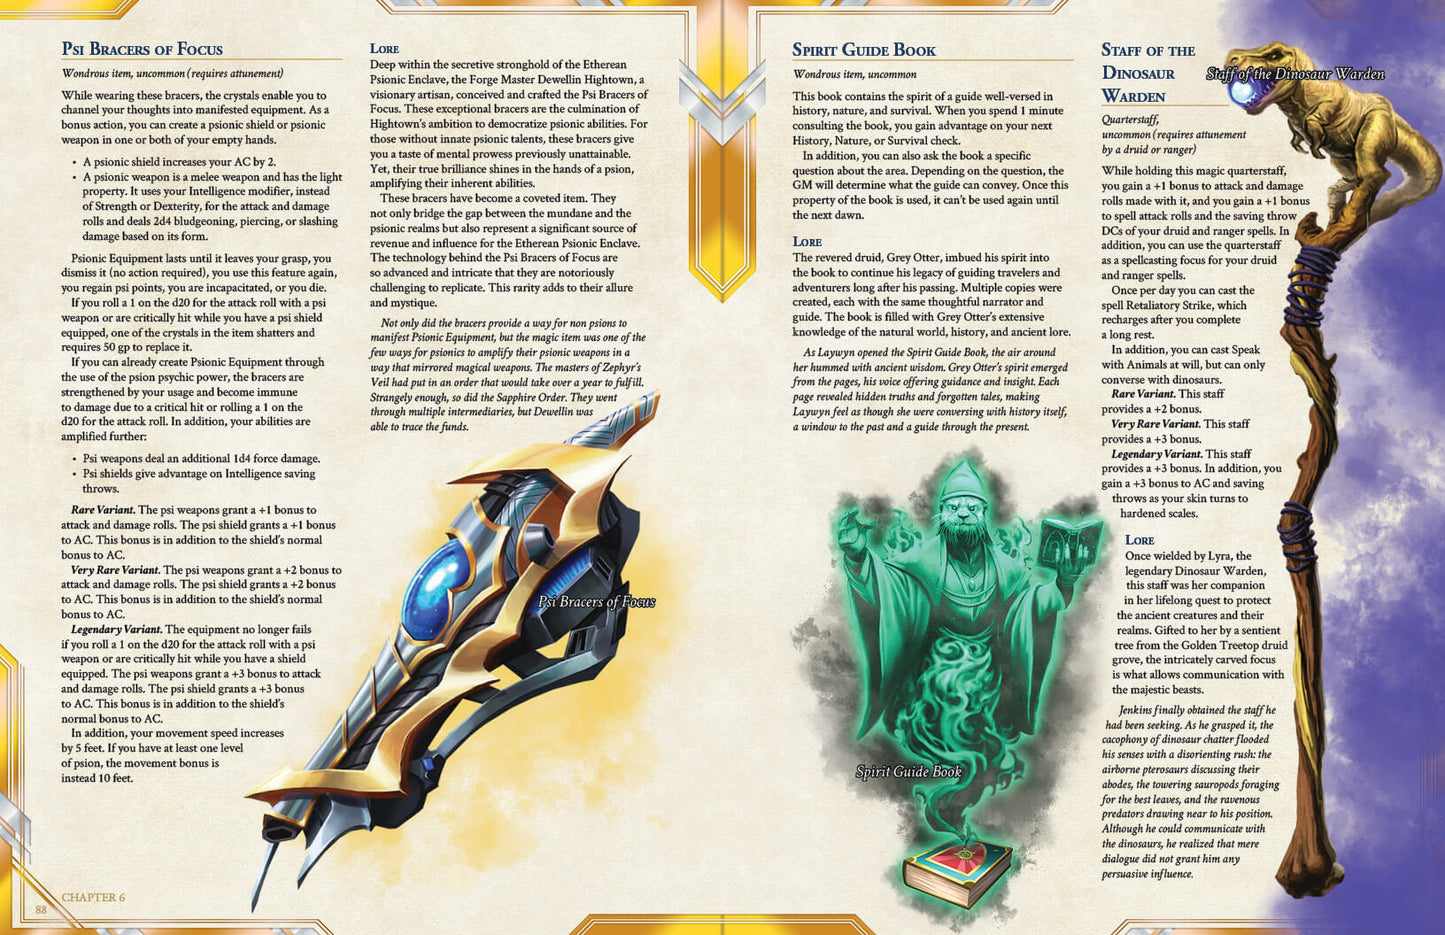 Creed's Codex: Legends of the Psions